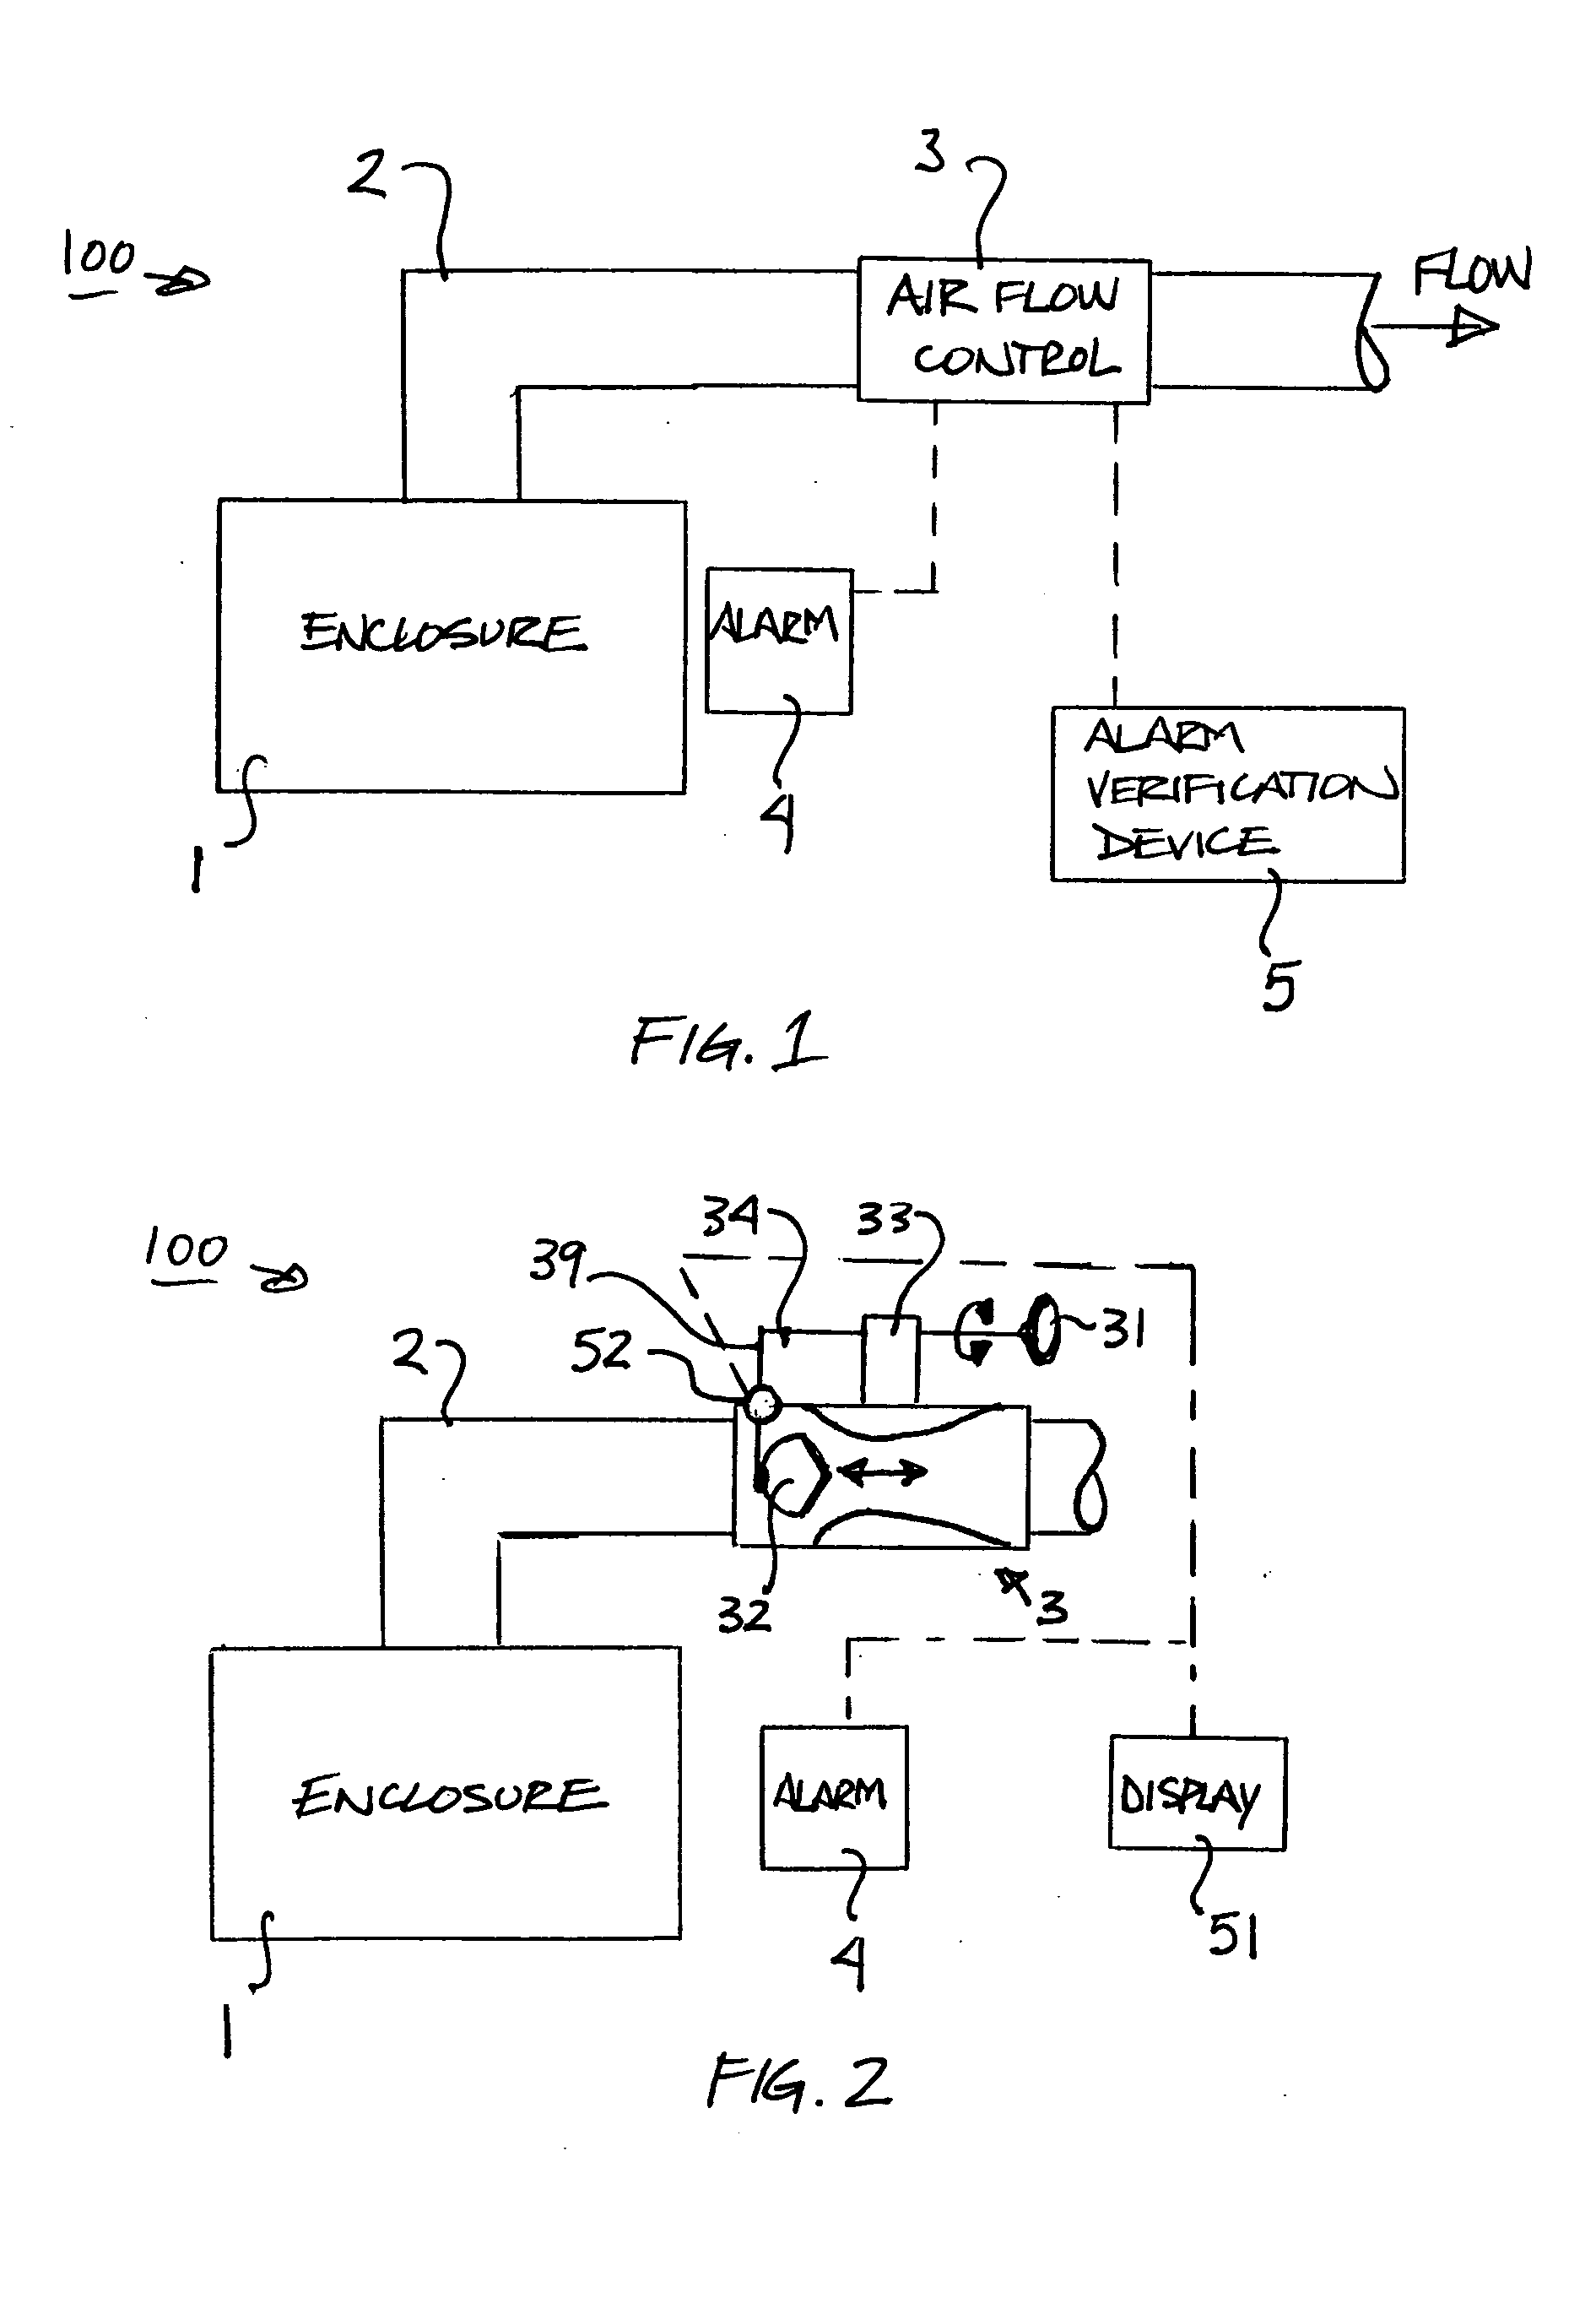 Method and apparatus for alarm verification in a ventilation system